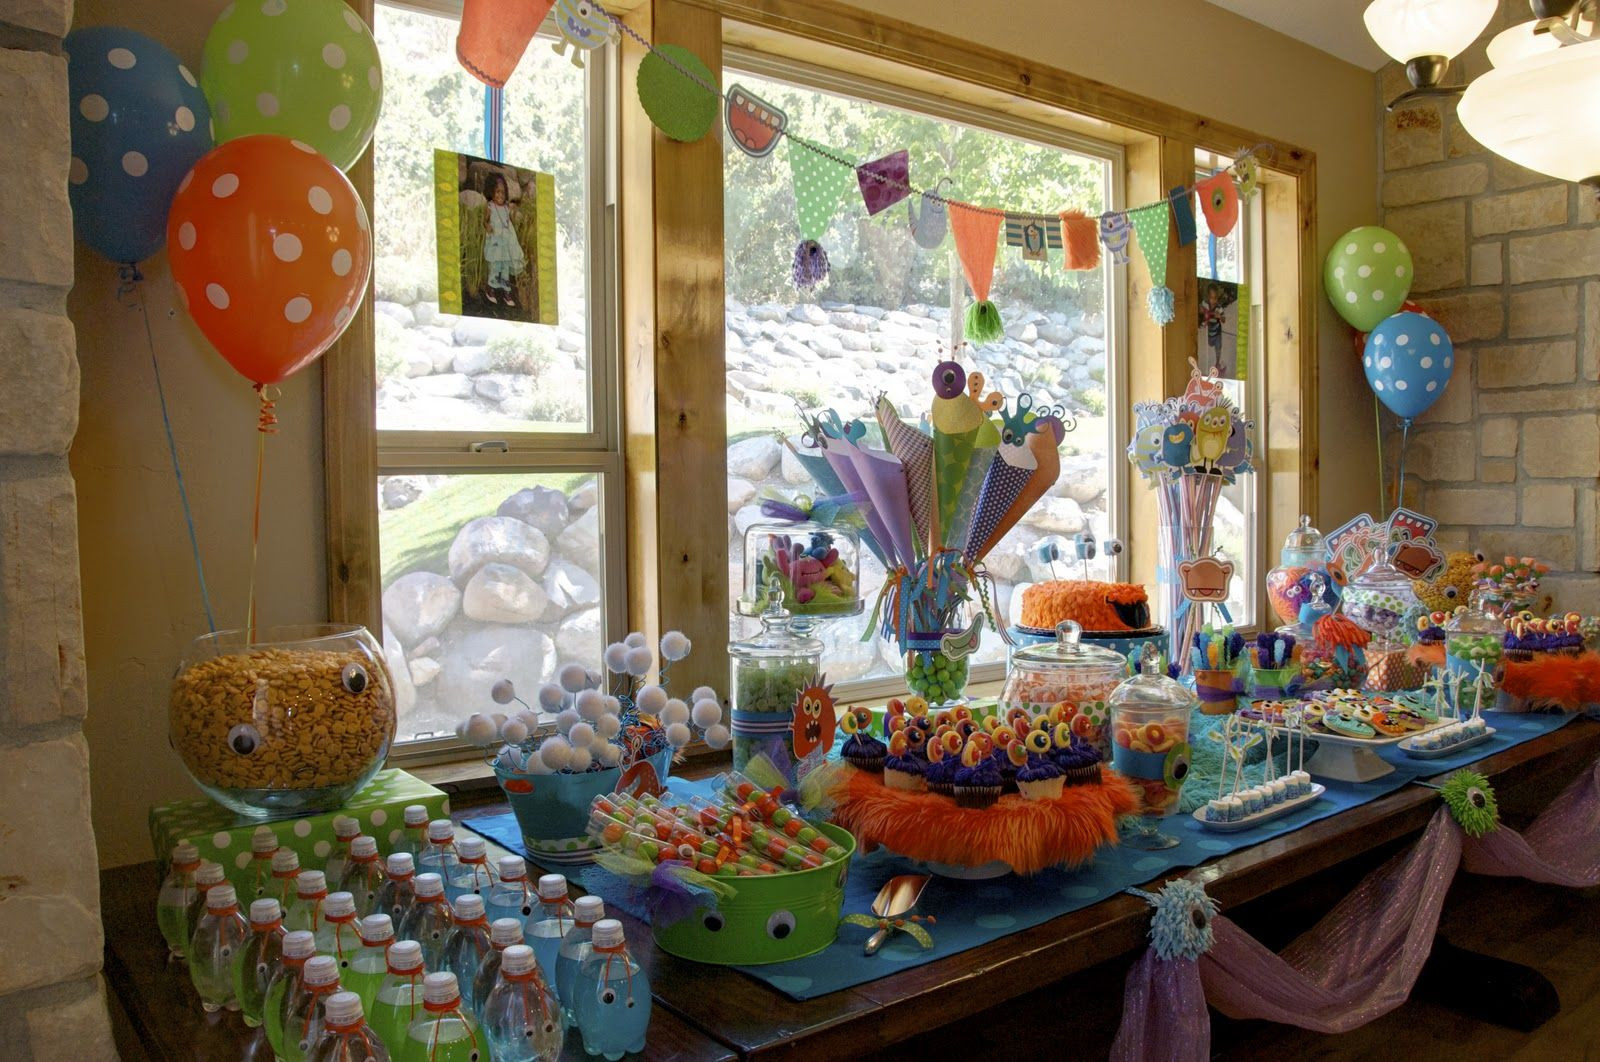 14 Year Old Birthday Party Ideas In The Winter
 My friends birthday is in the winter and she wanteâ Š